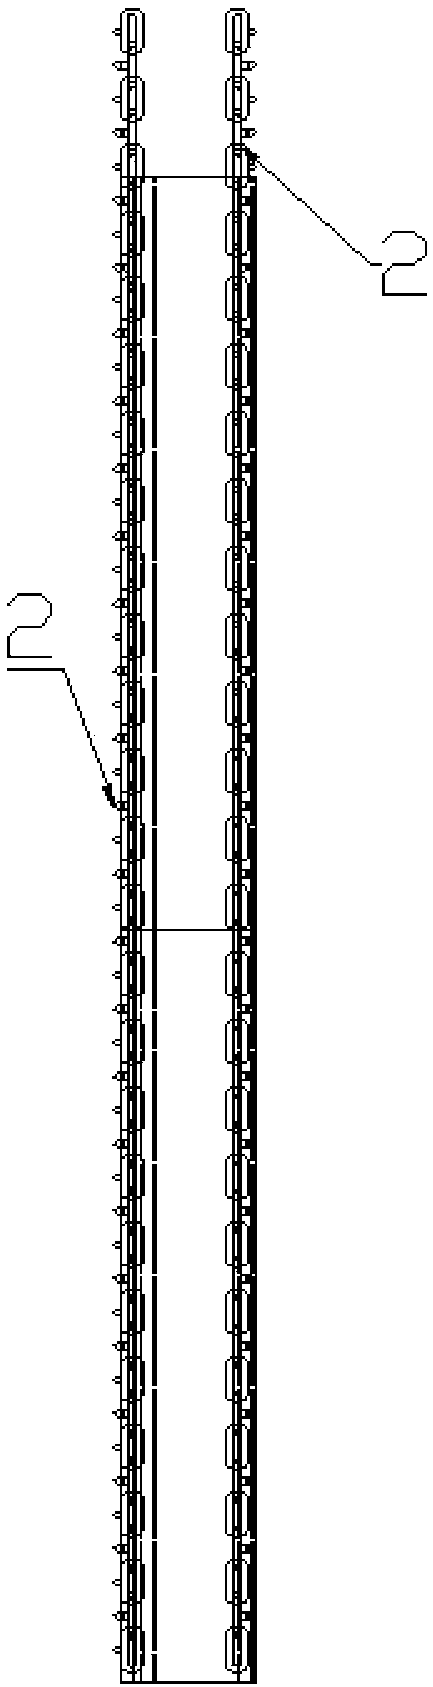 Link-chain-type egg conveying equipment